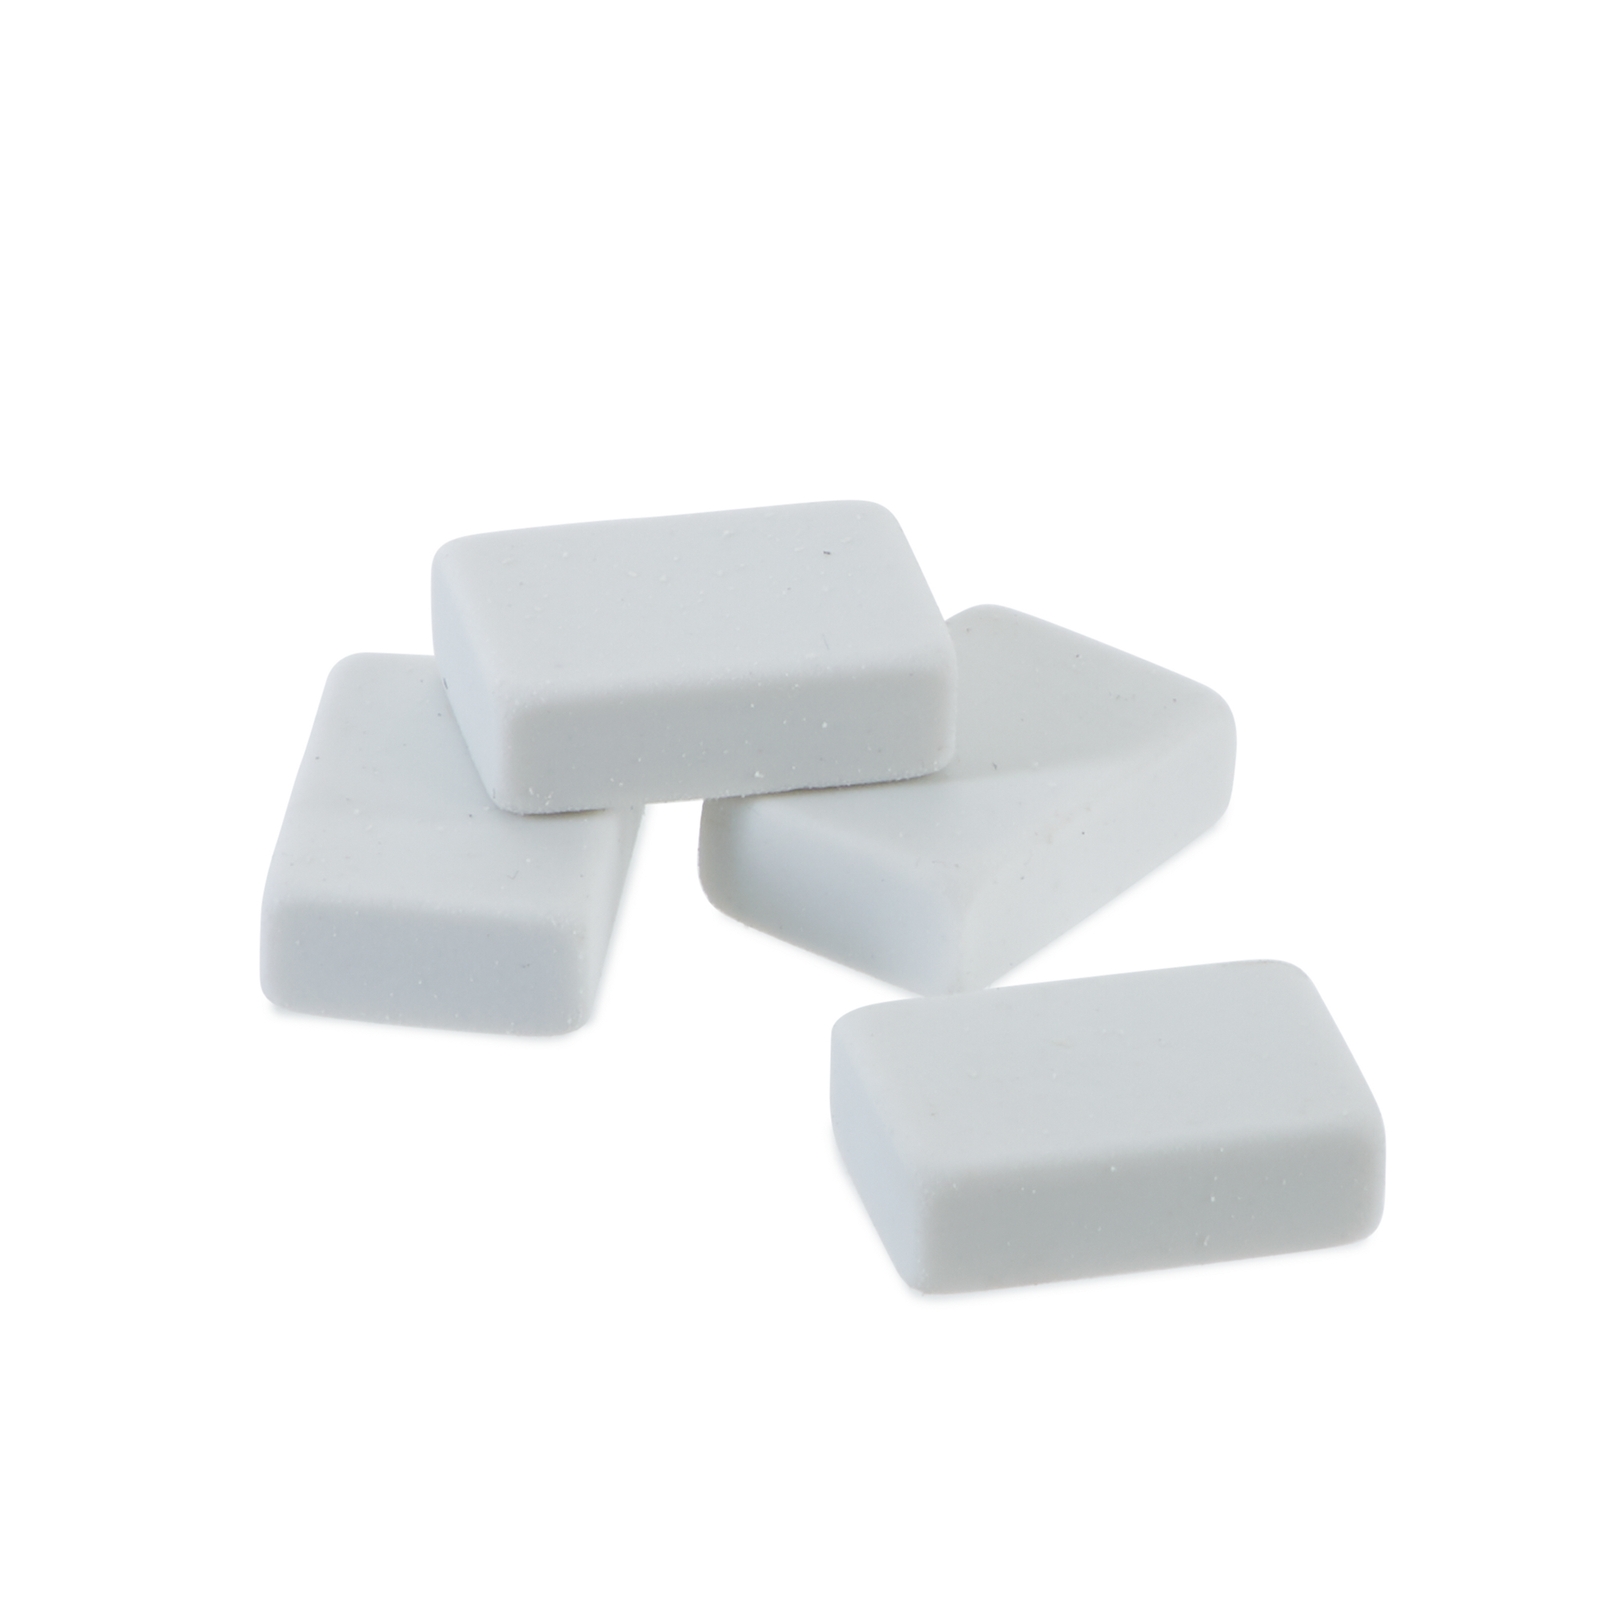 Classmates Eraser/Rubber Small White - Pack of 60